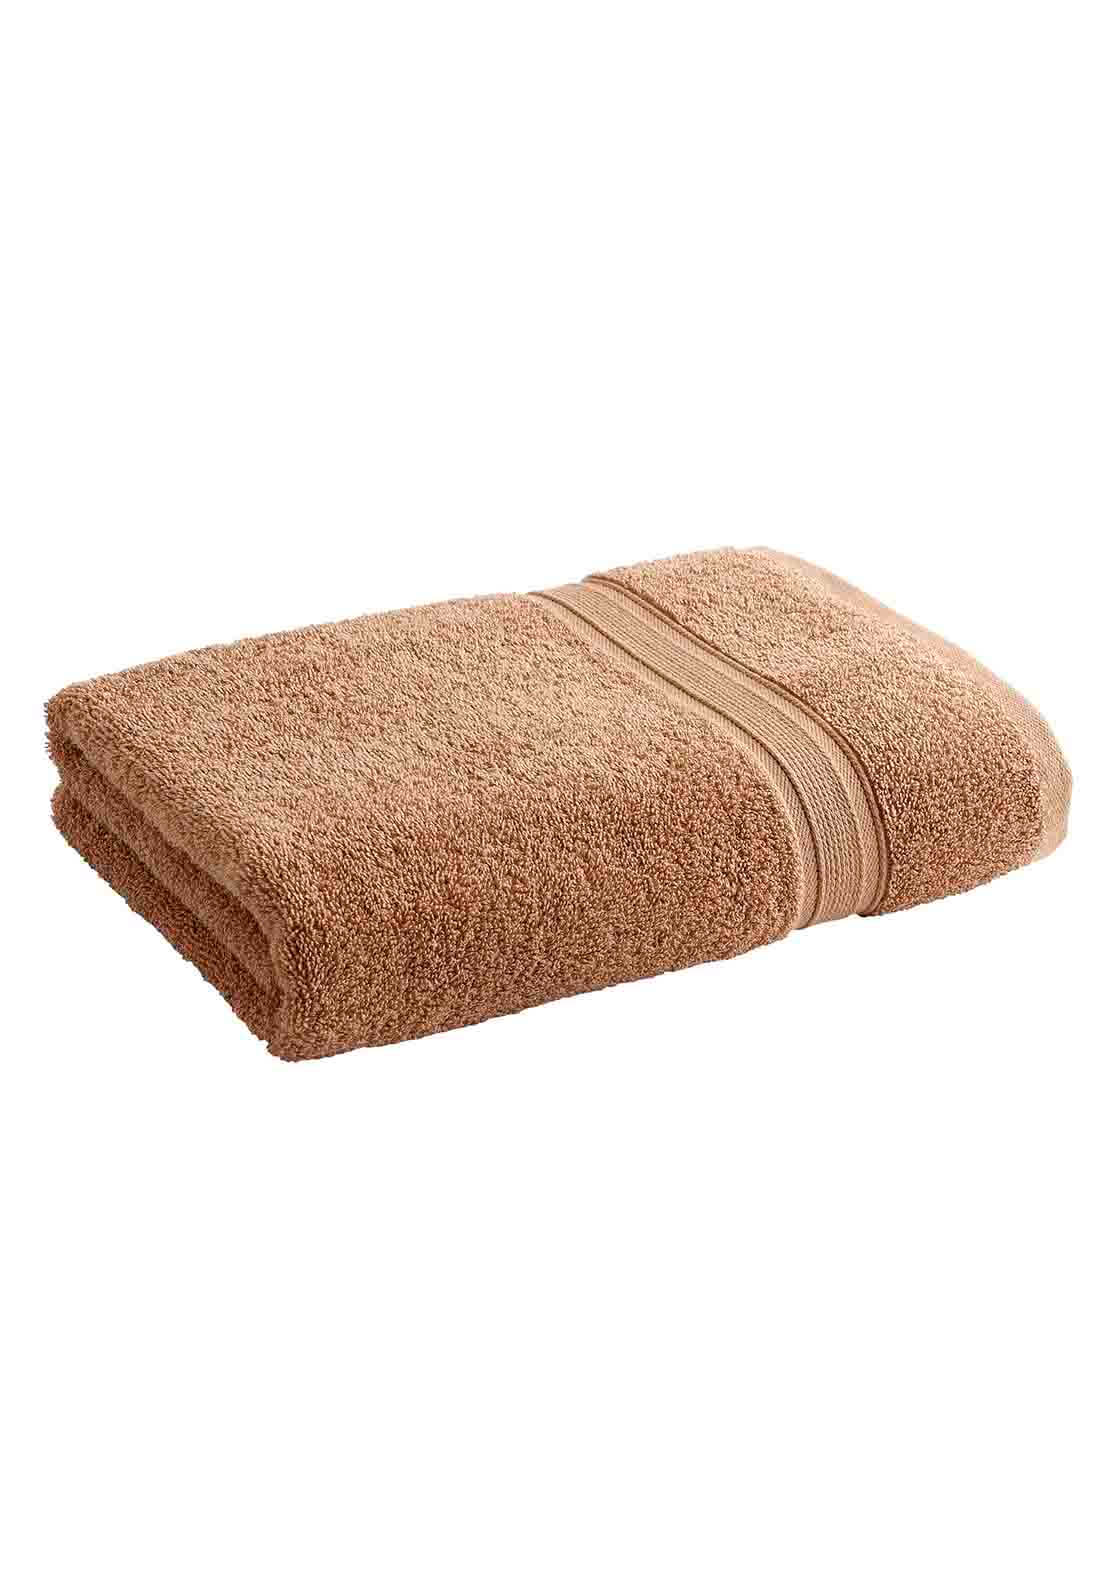 Christy Serene Hand Towel - Chai Latte 1 Shaws Department Stores